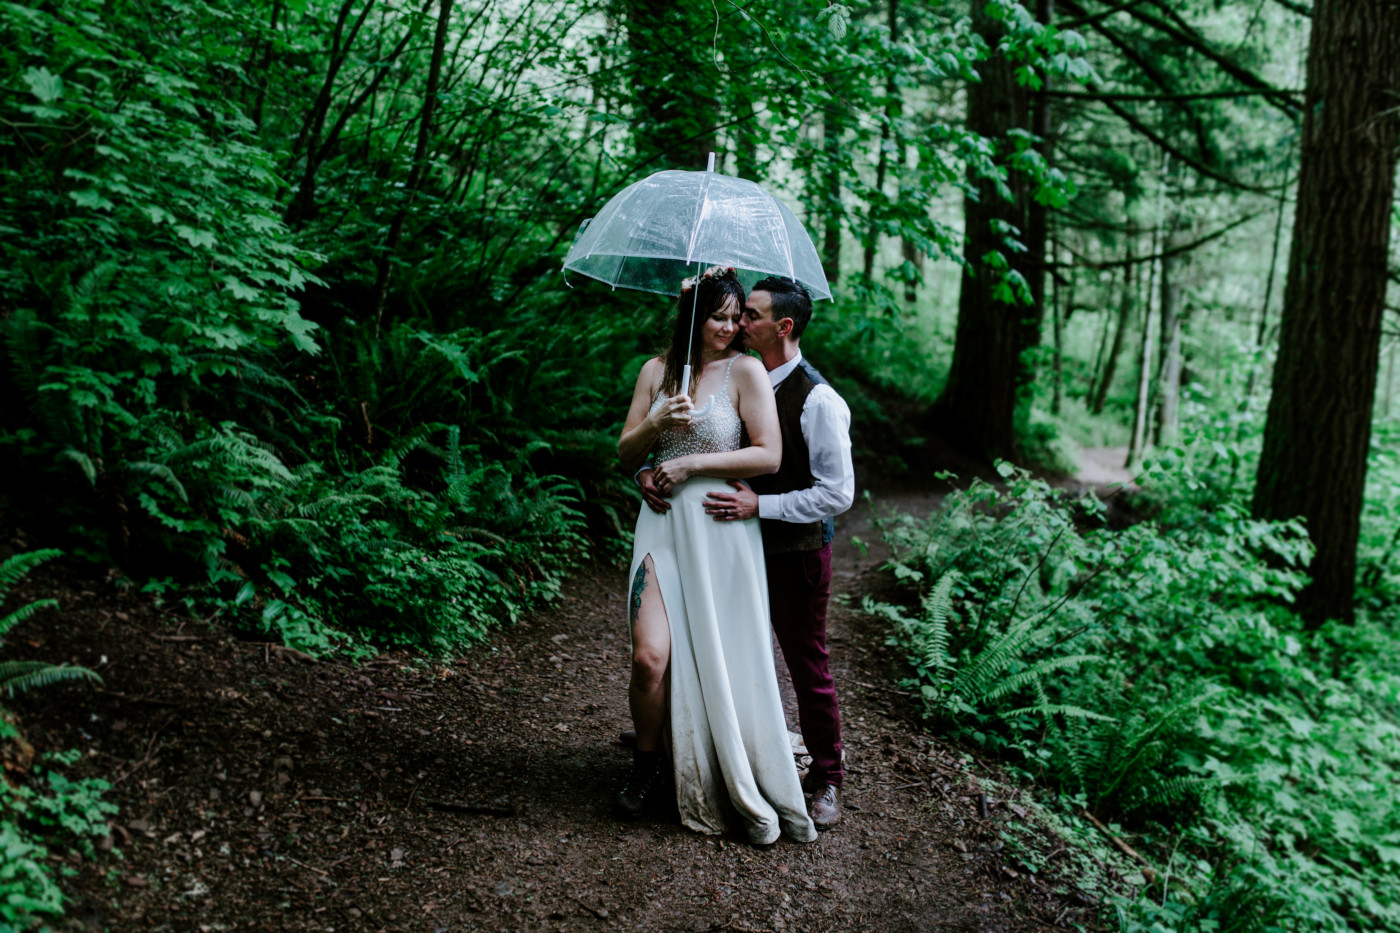 Andrew and Jordan stand under an umbrella on a trail in the Columbia River Gorge.